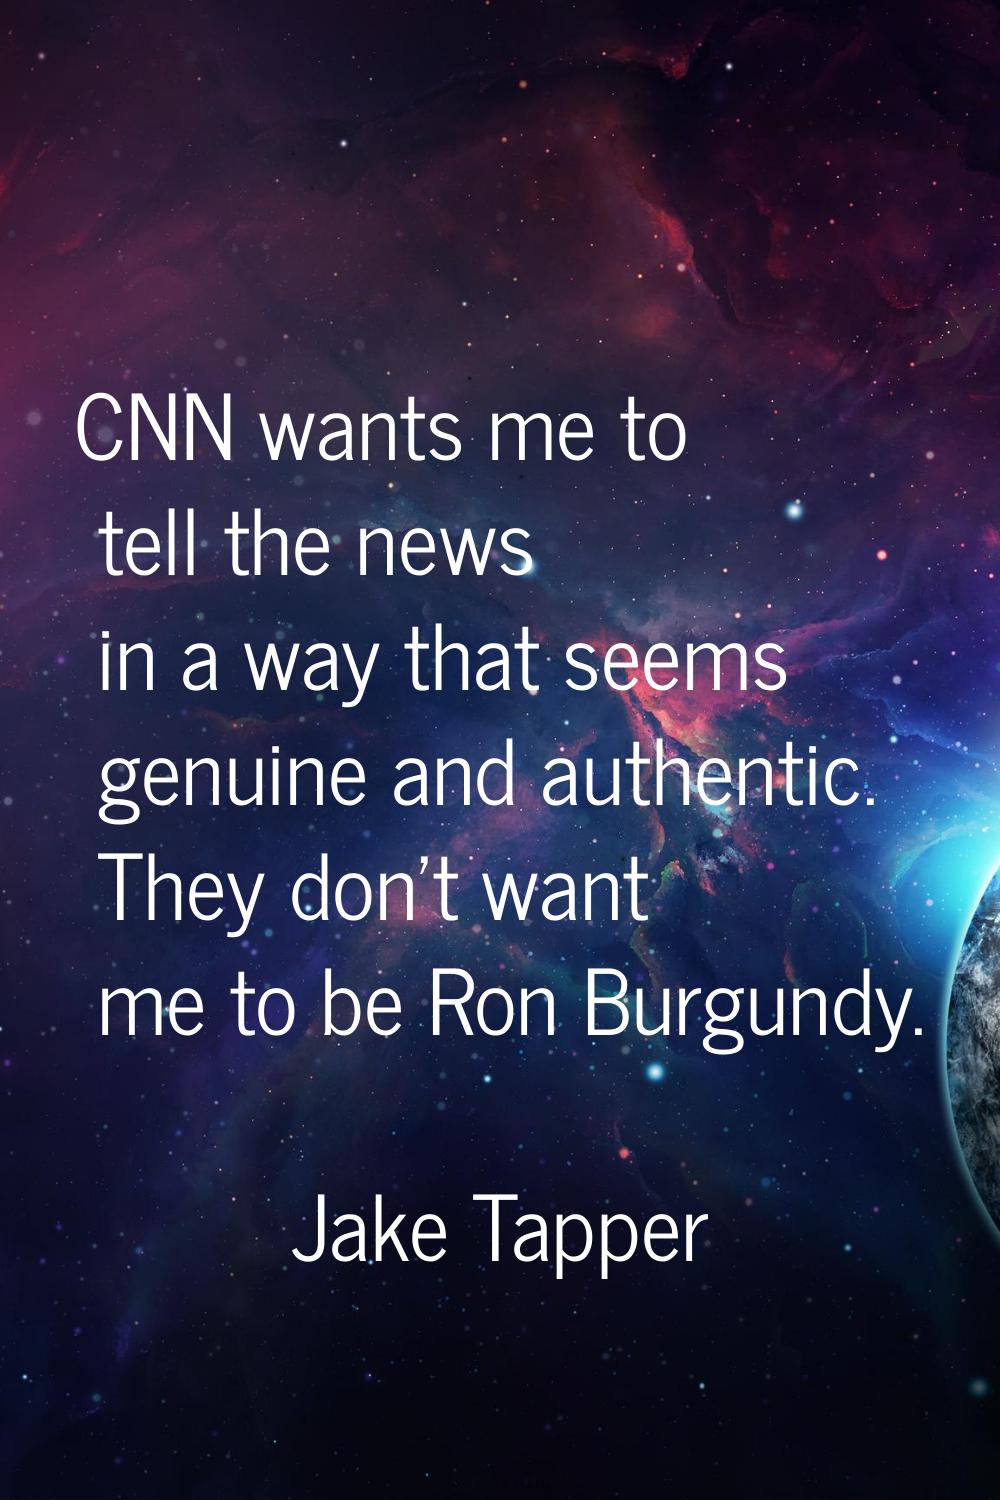 CNN wants me to tell the news in a way that seems genuine and authentic. They don't want me to be R